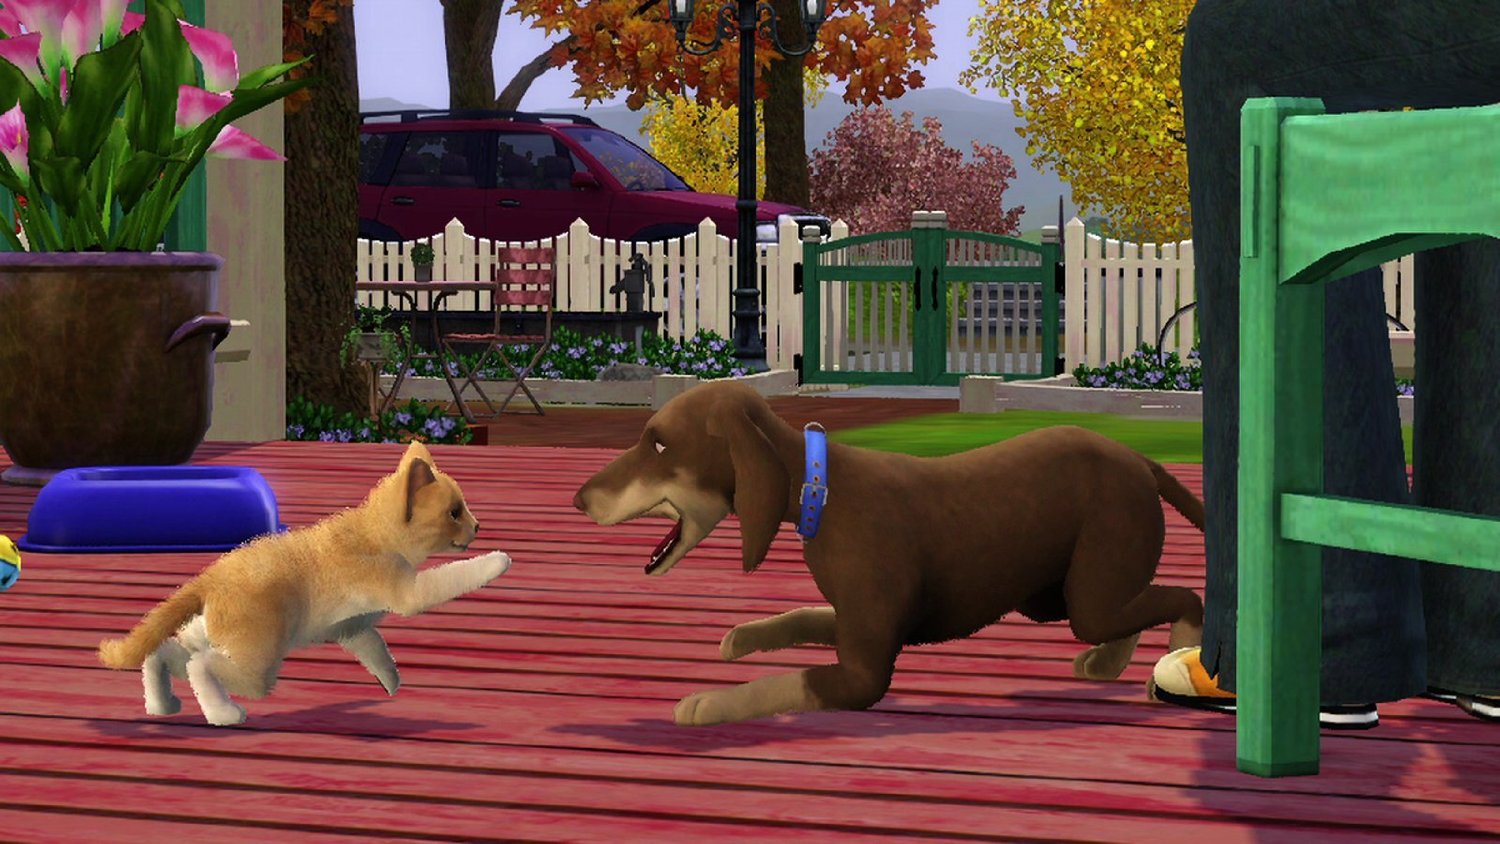 sims 2 pets expansion pack free download